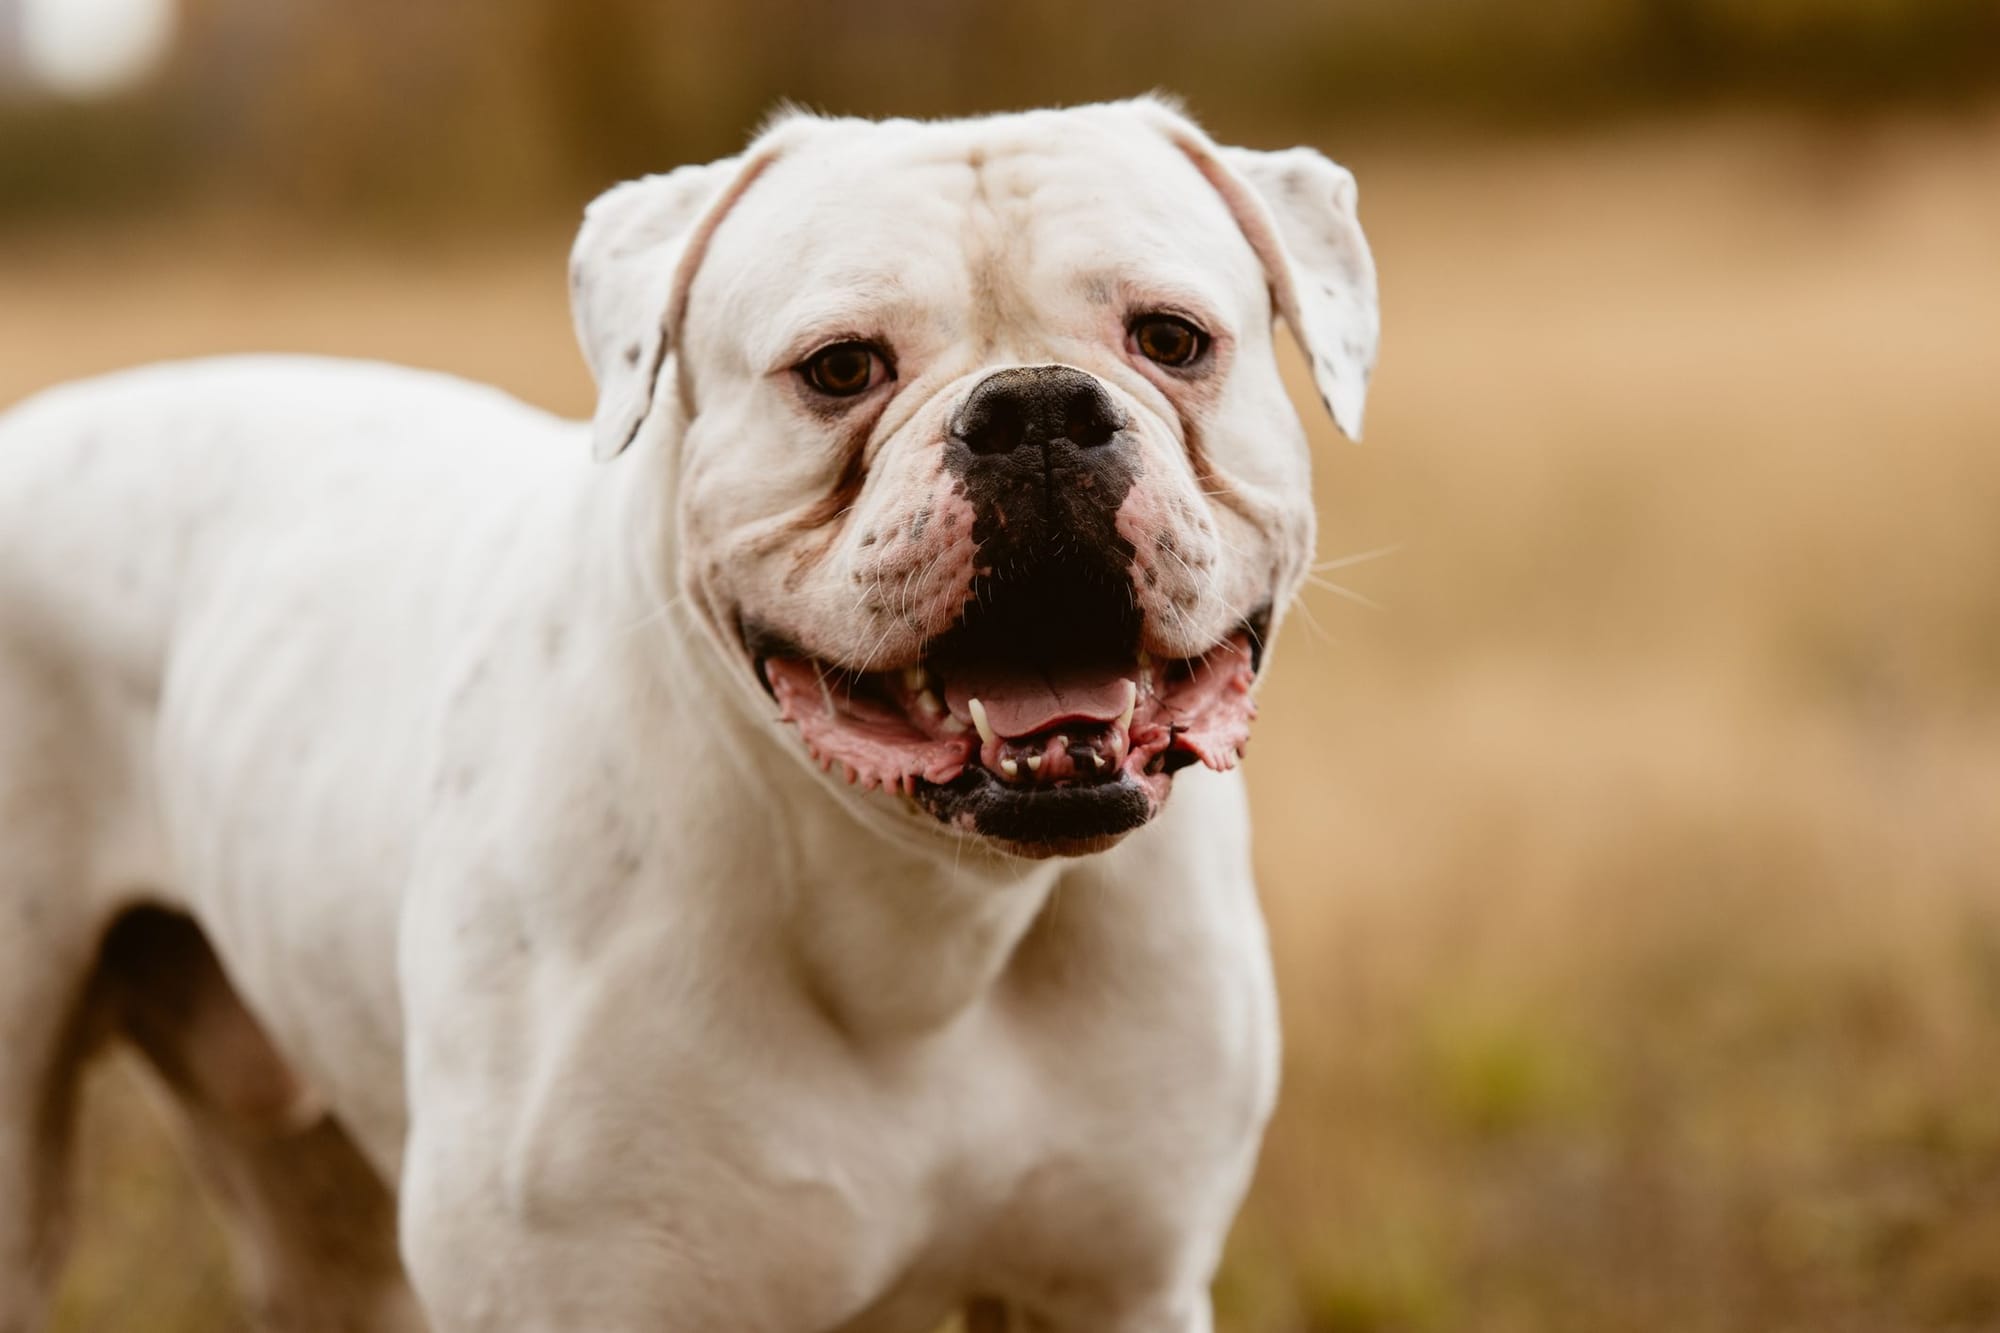 Can American Bulldogs be Service Dogs?